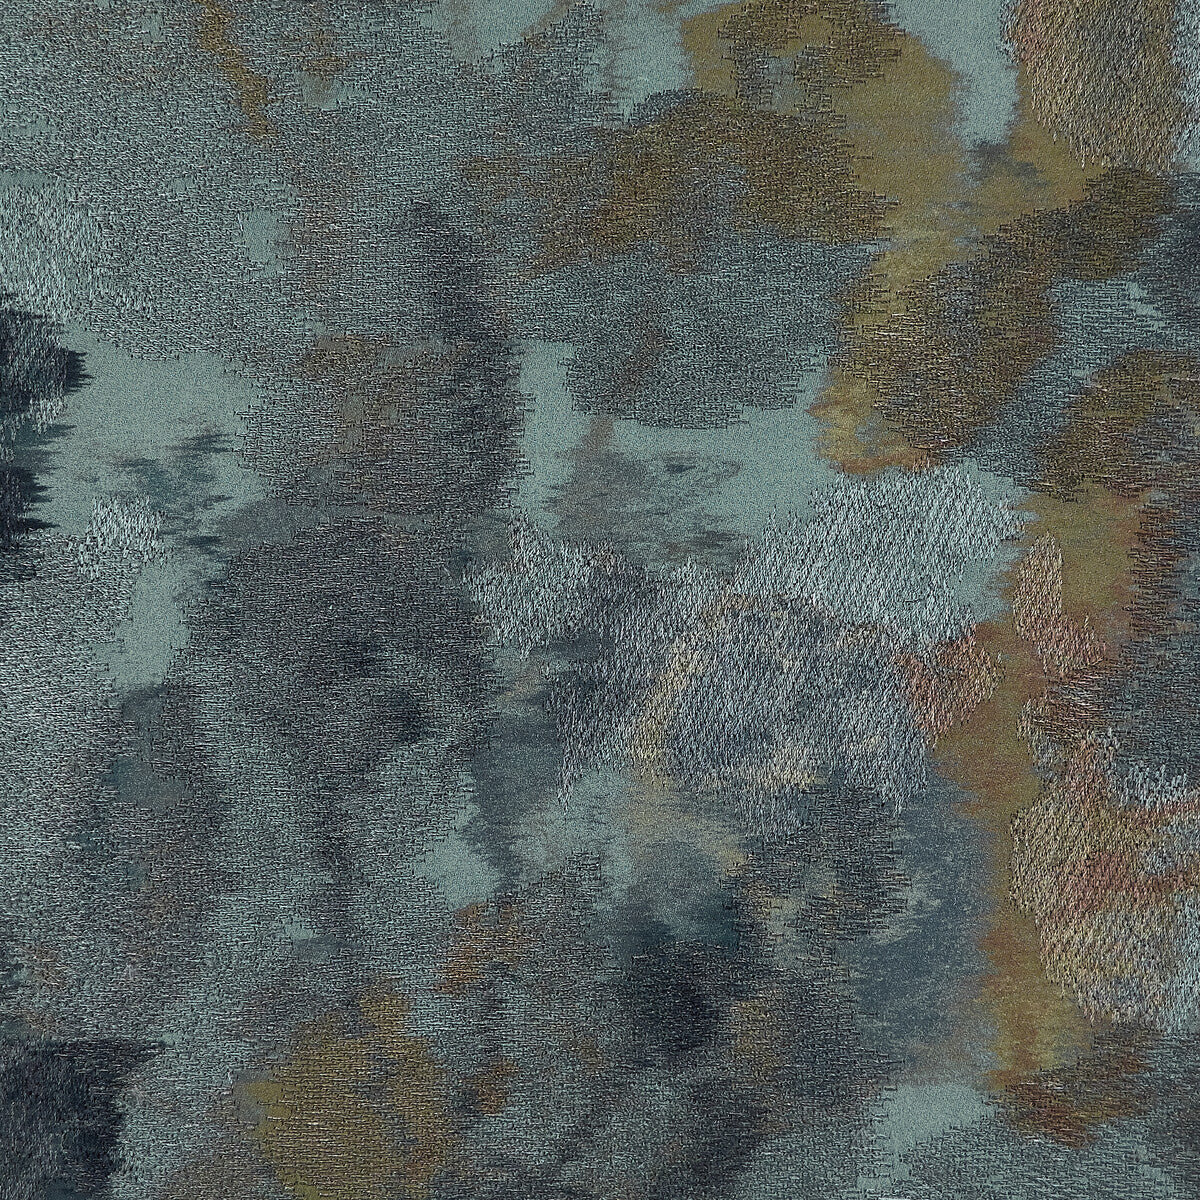 Folie fabric in 4 color - pattern LZ-30210.04.0 - by Kravet Design in the Lizzo collection